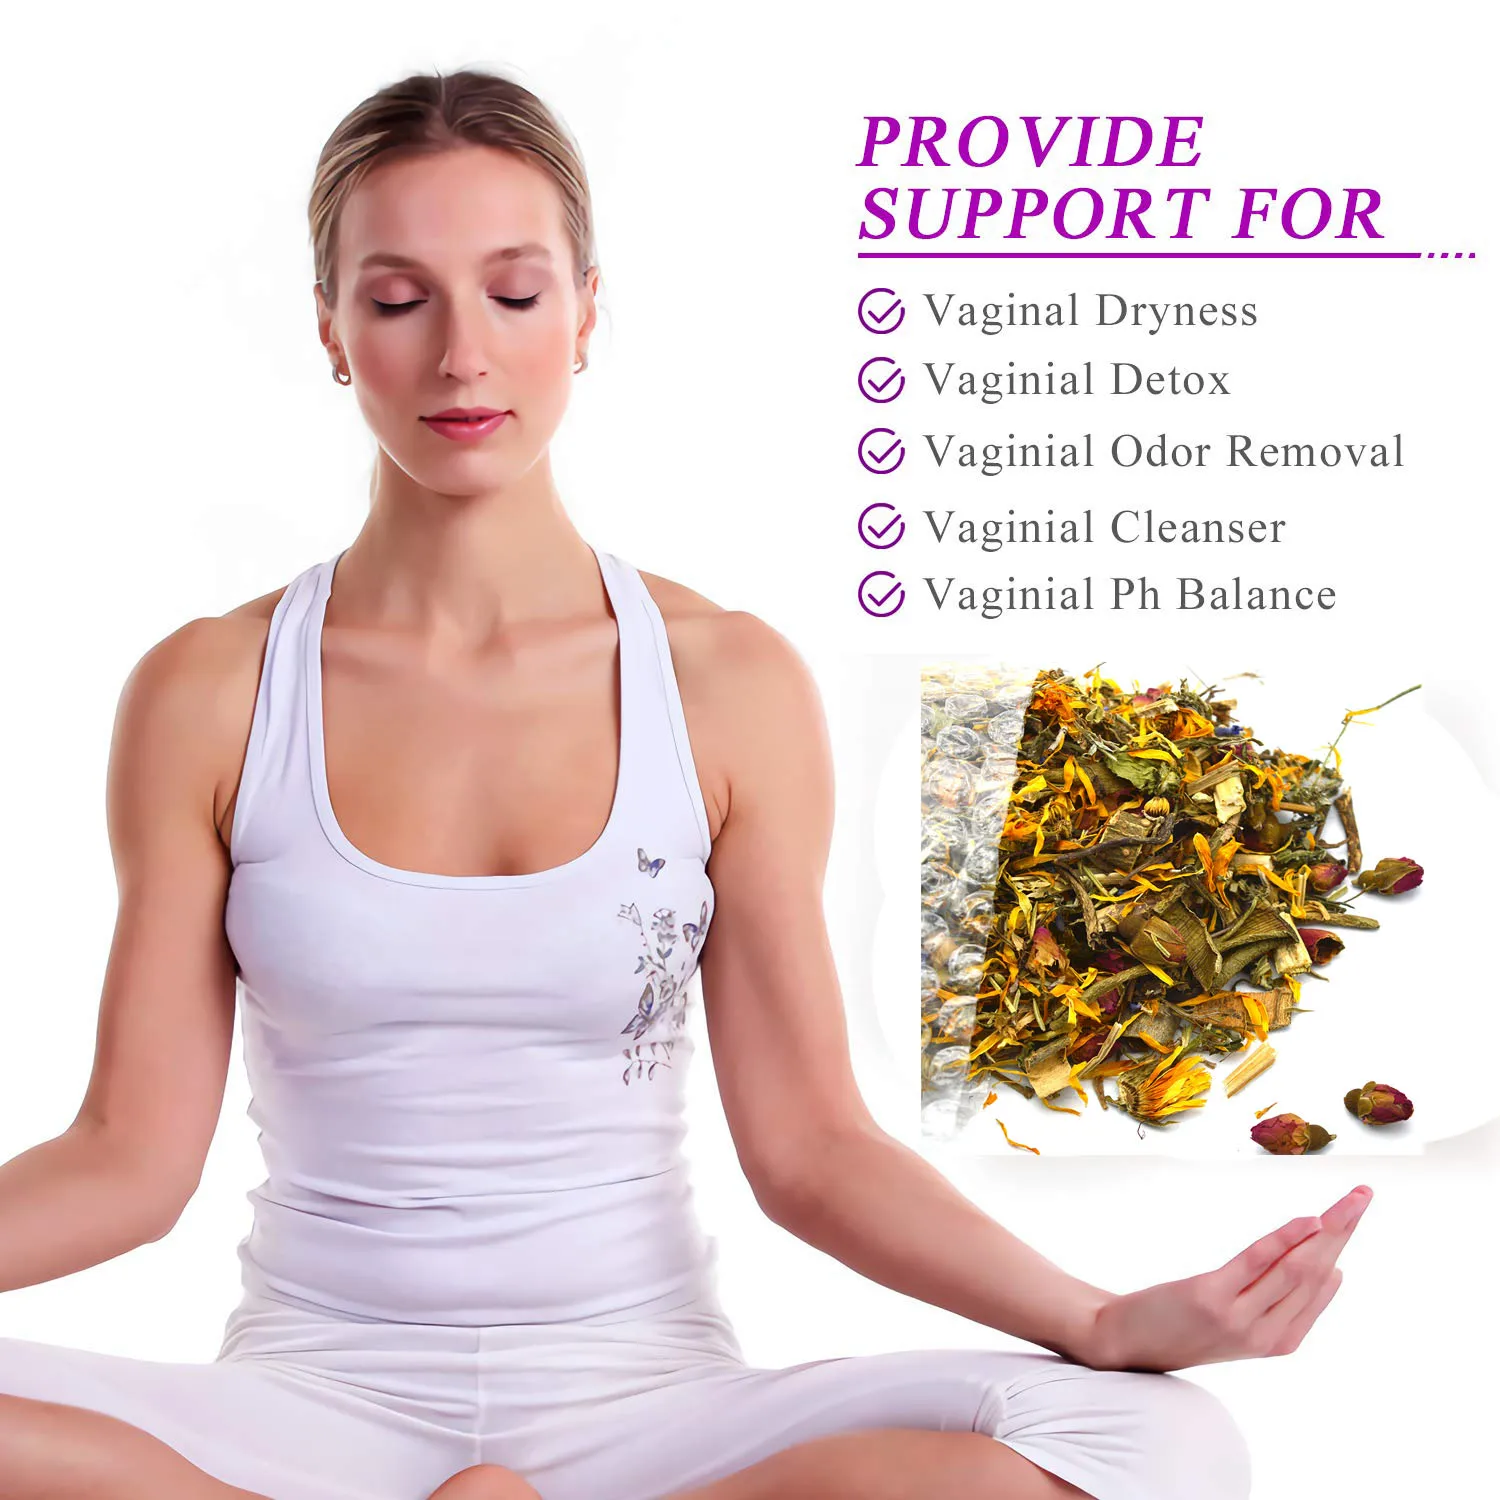 Yoni Steam Herbs Blends For Women Vaginal Healing Cleansing Healthcare